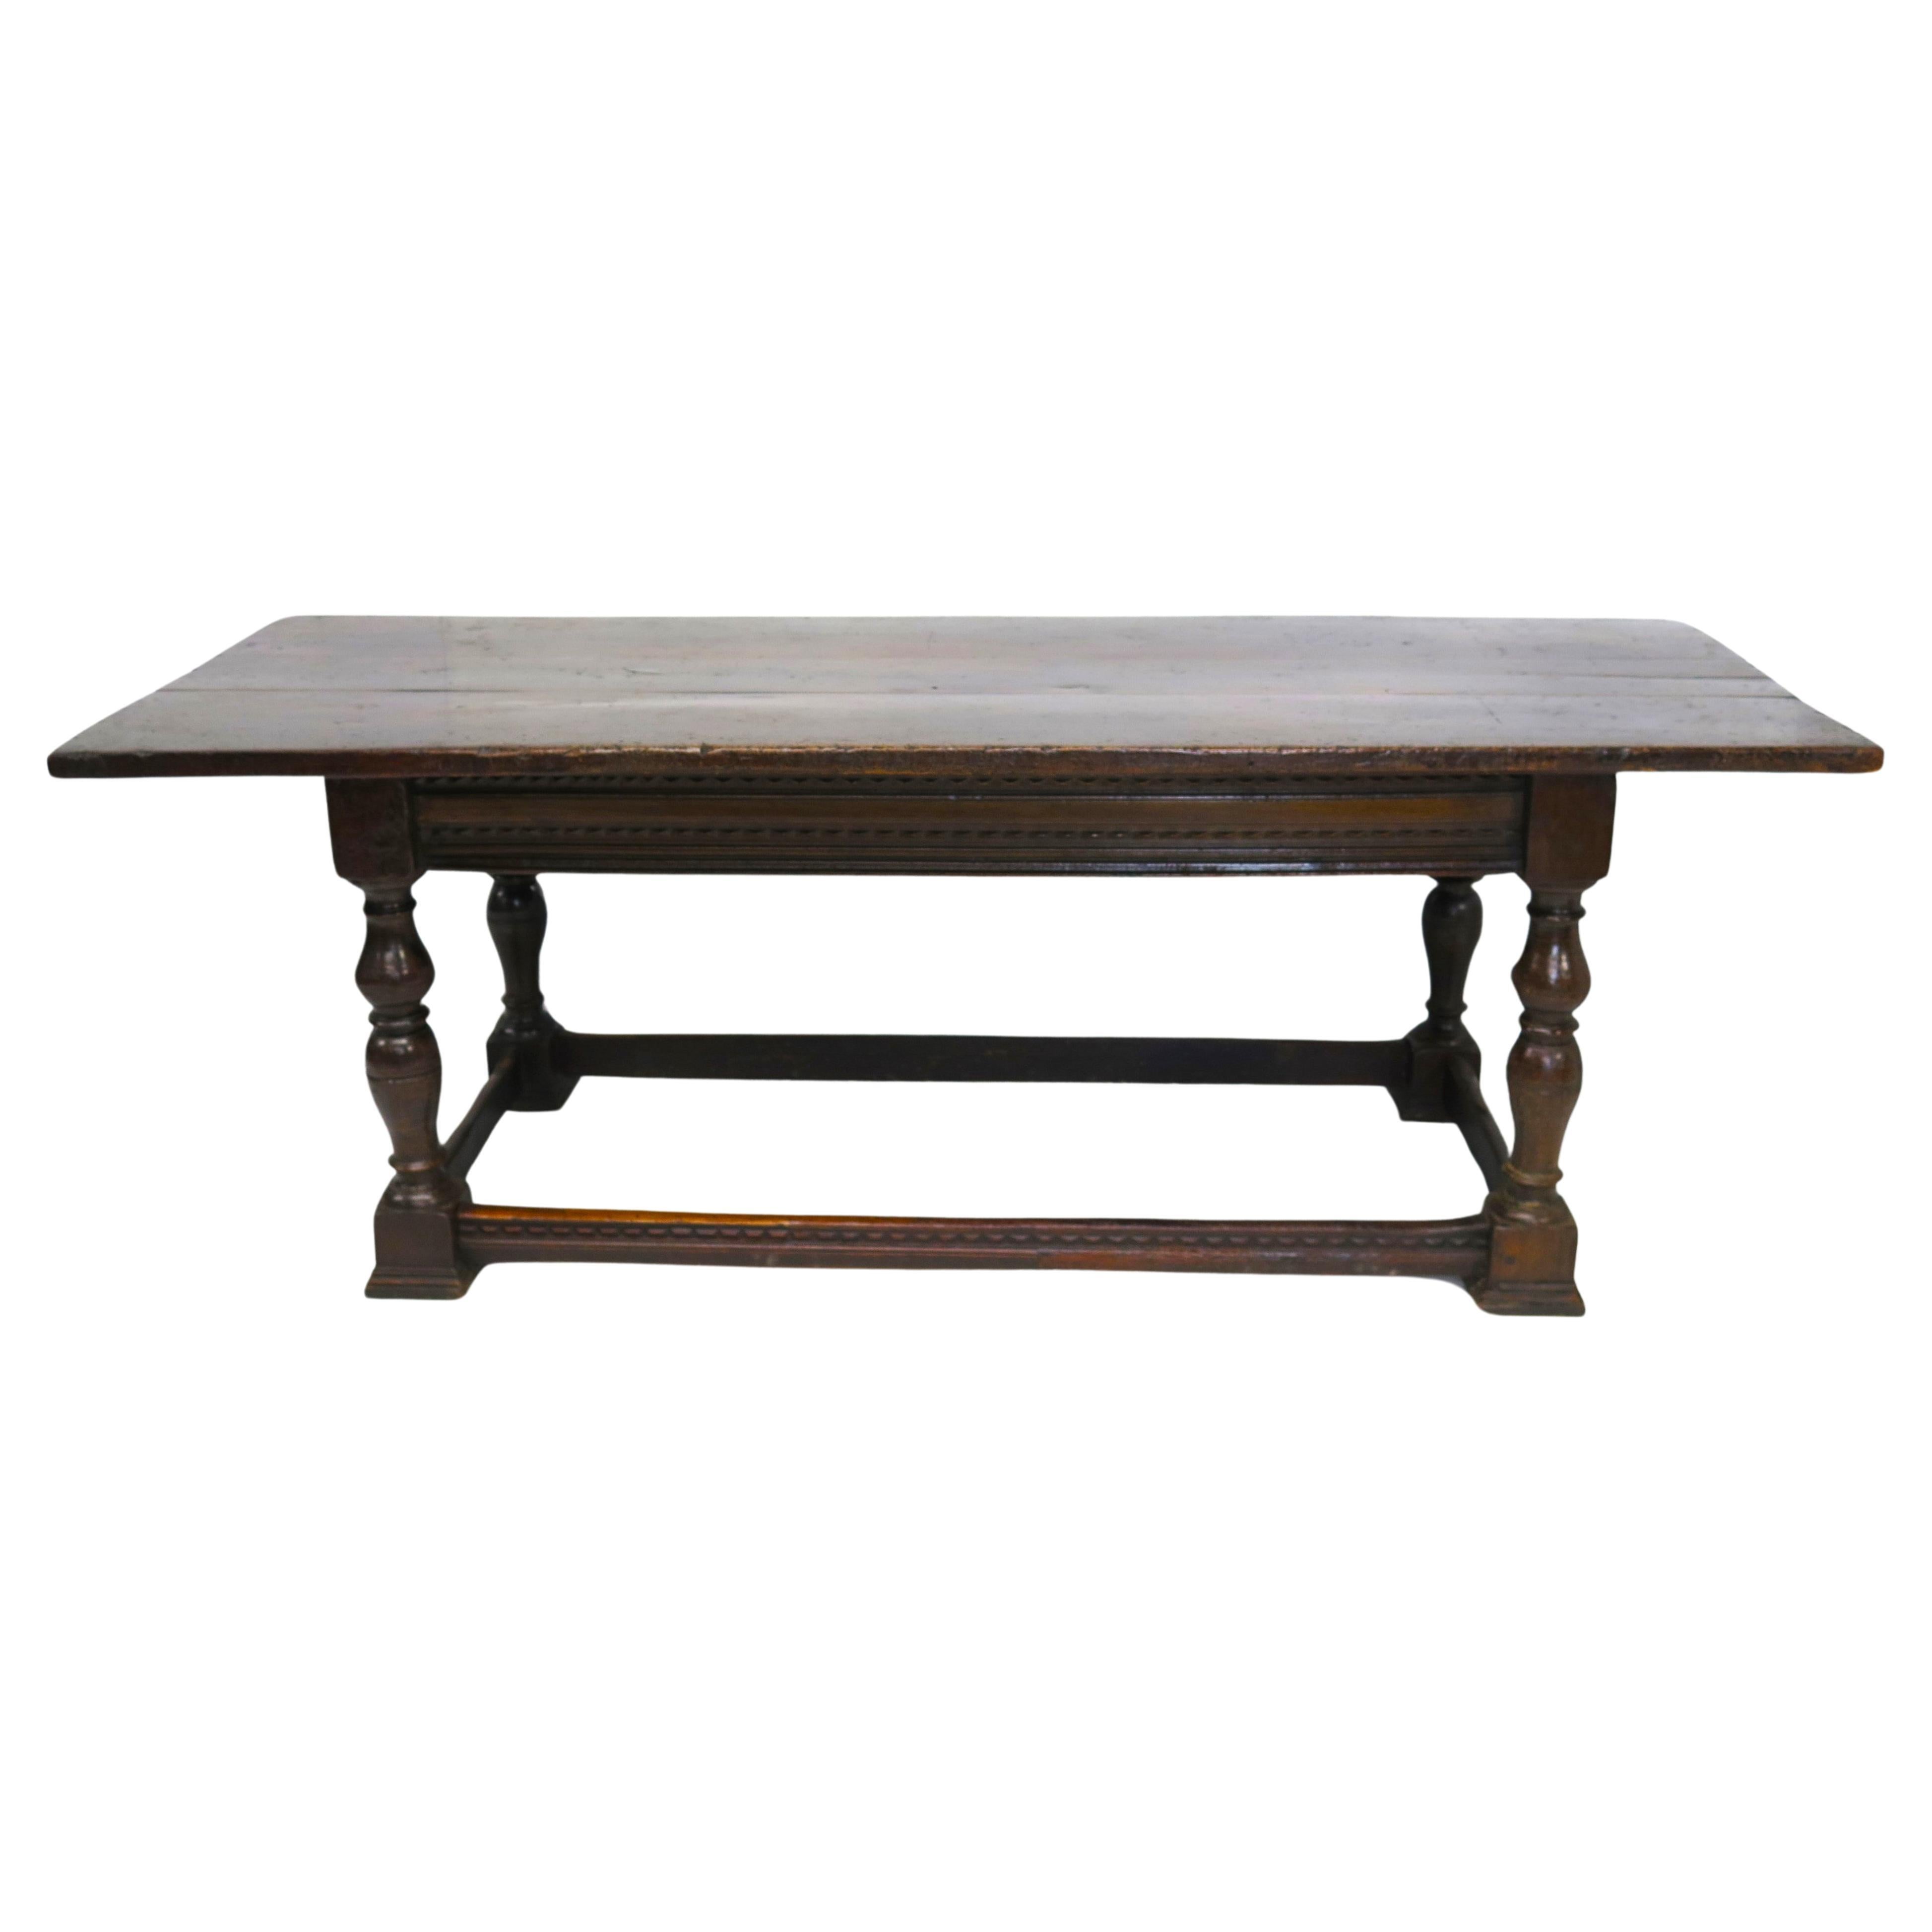 Late 17th-Early 18th Century English Oak Refectory Table For Sale